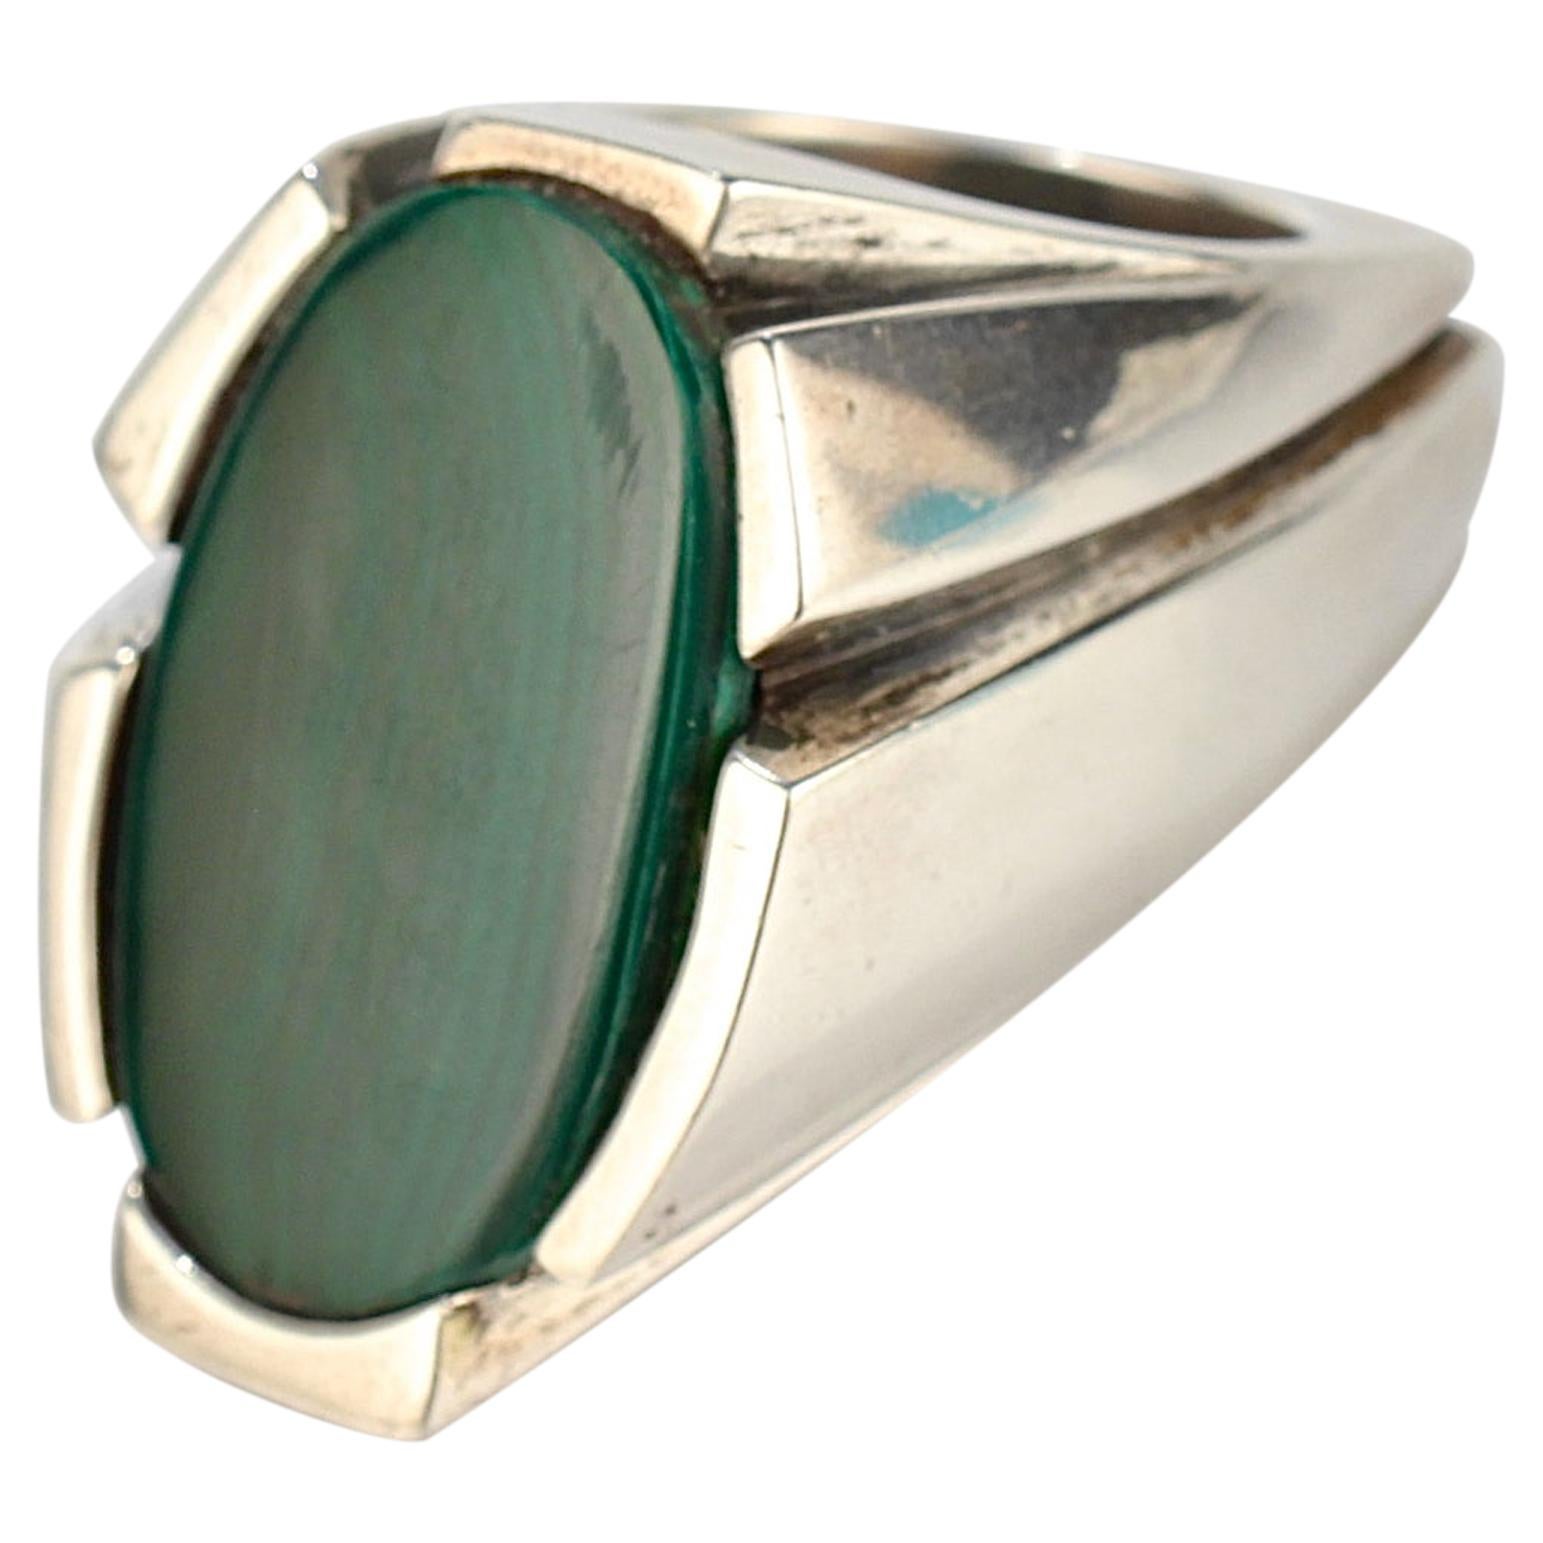 Heavy Signed Wesley Emmons Modernist Sterling Silver and Malachite Signet Ring